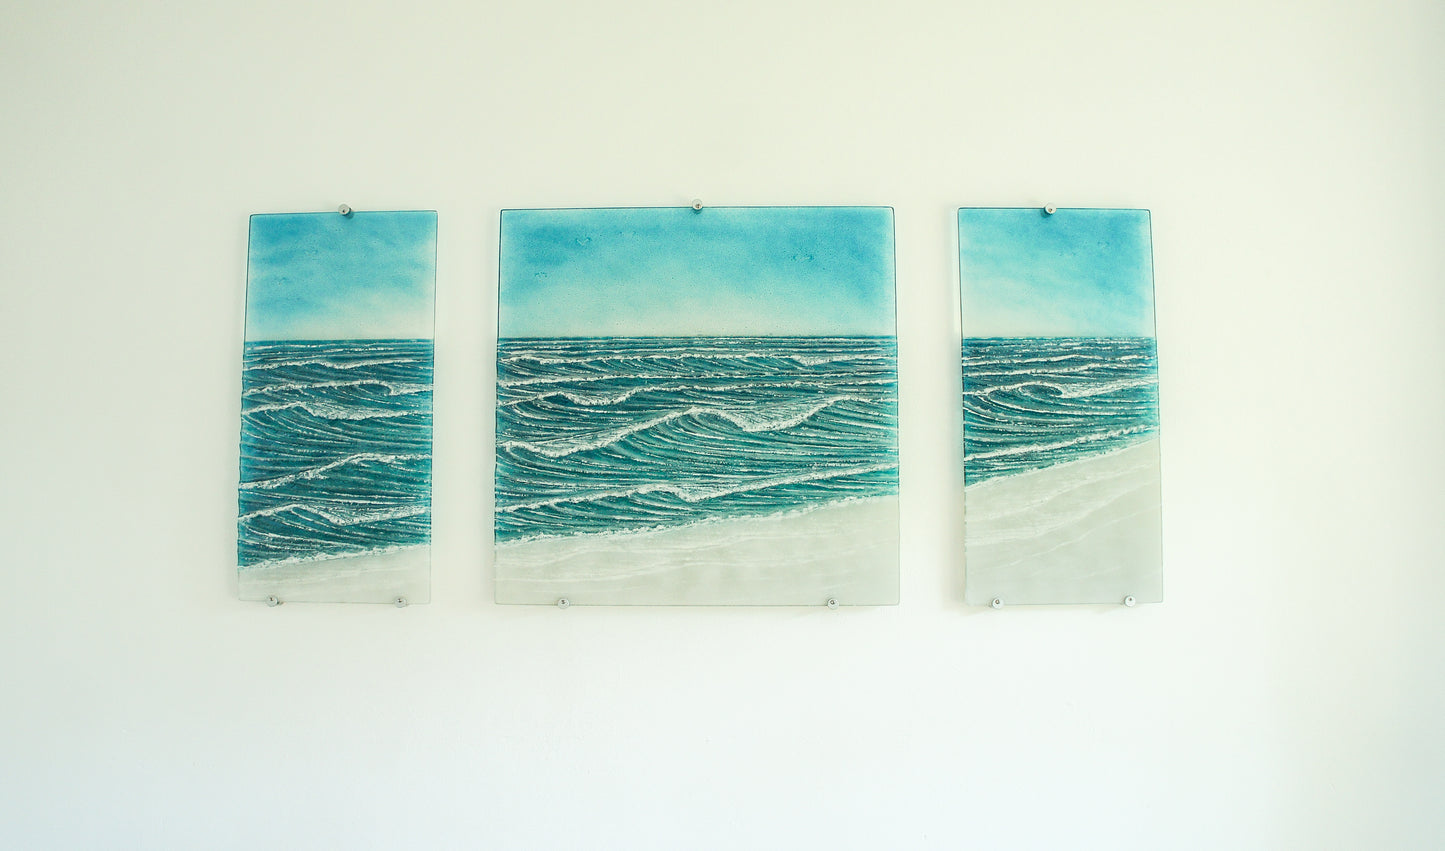 Large Triptych Wave Wall Panels - Left&Right 30x60cm (12x24")/Middle 60x60cm (24x24") with 9 fixings